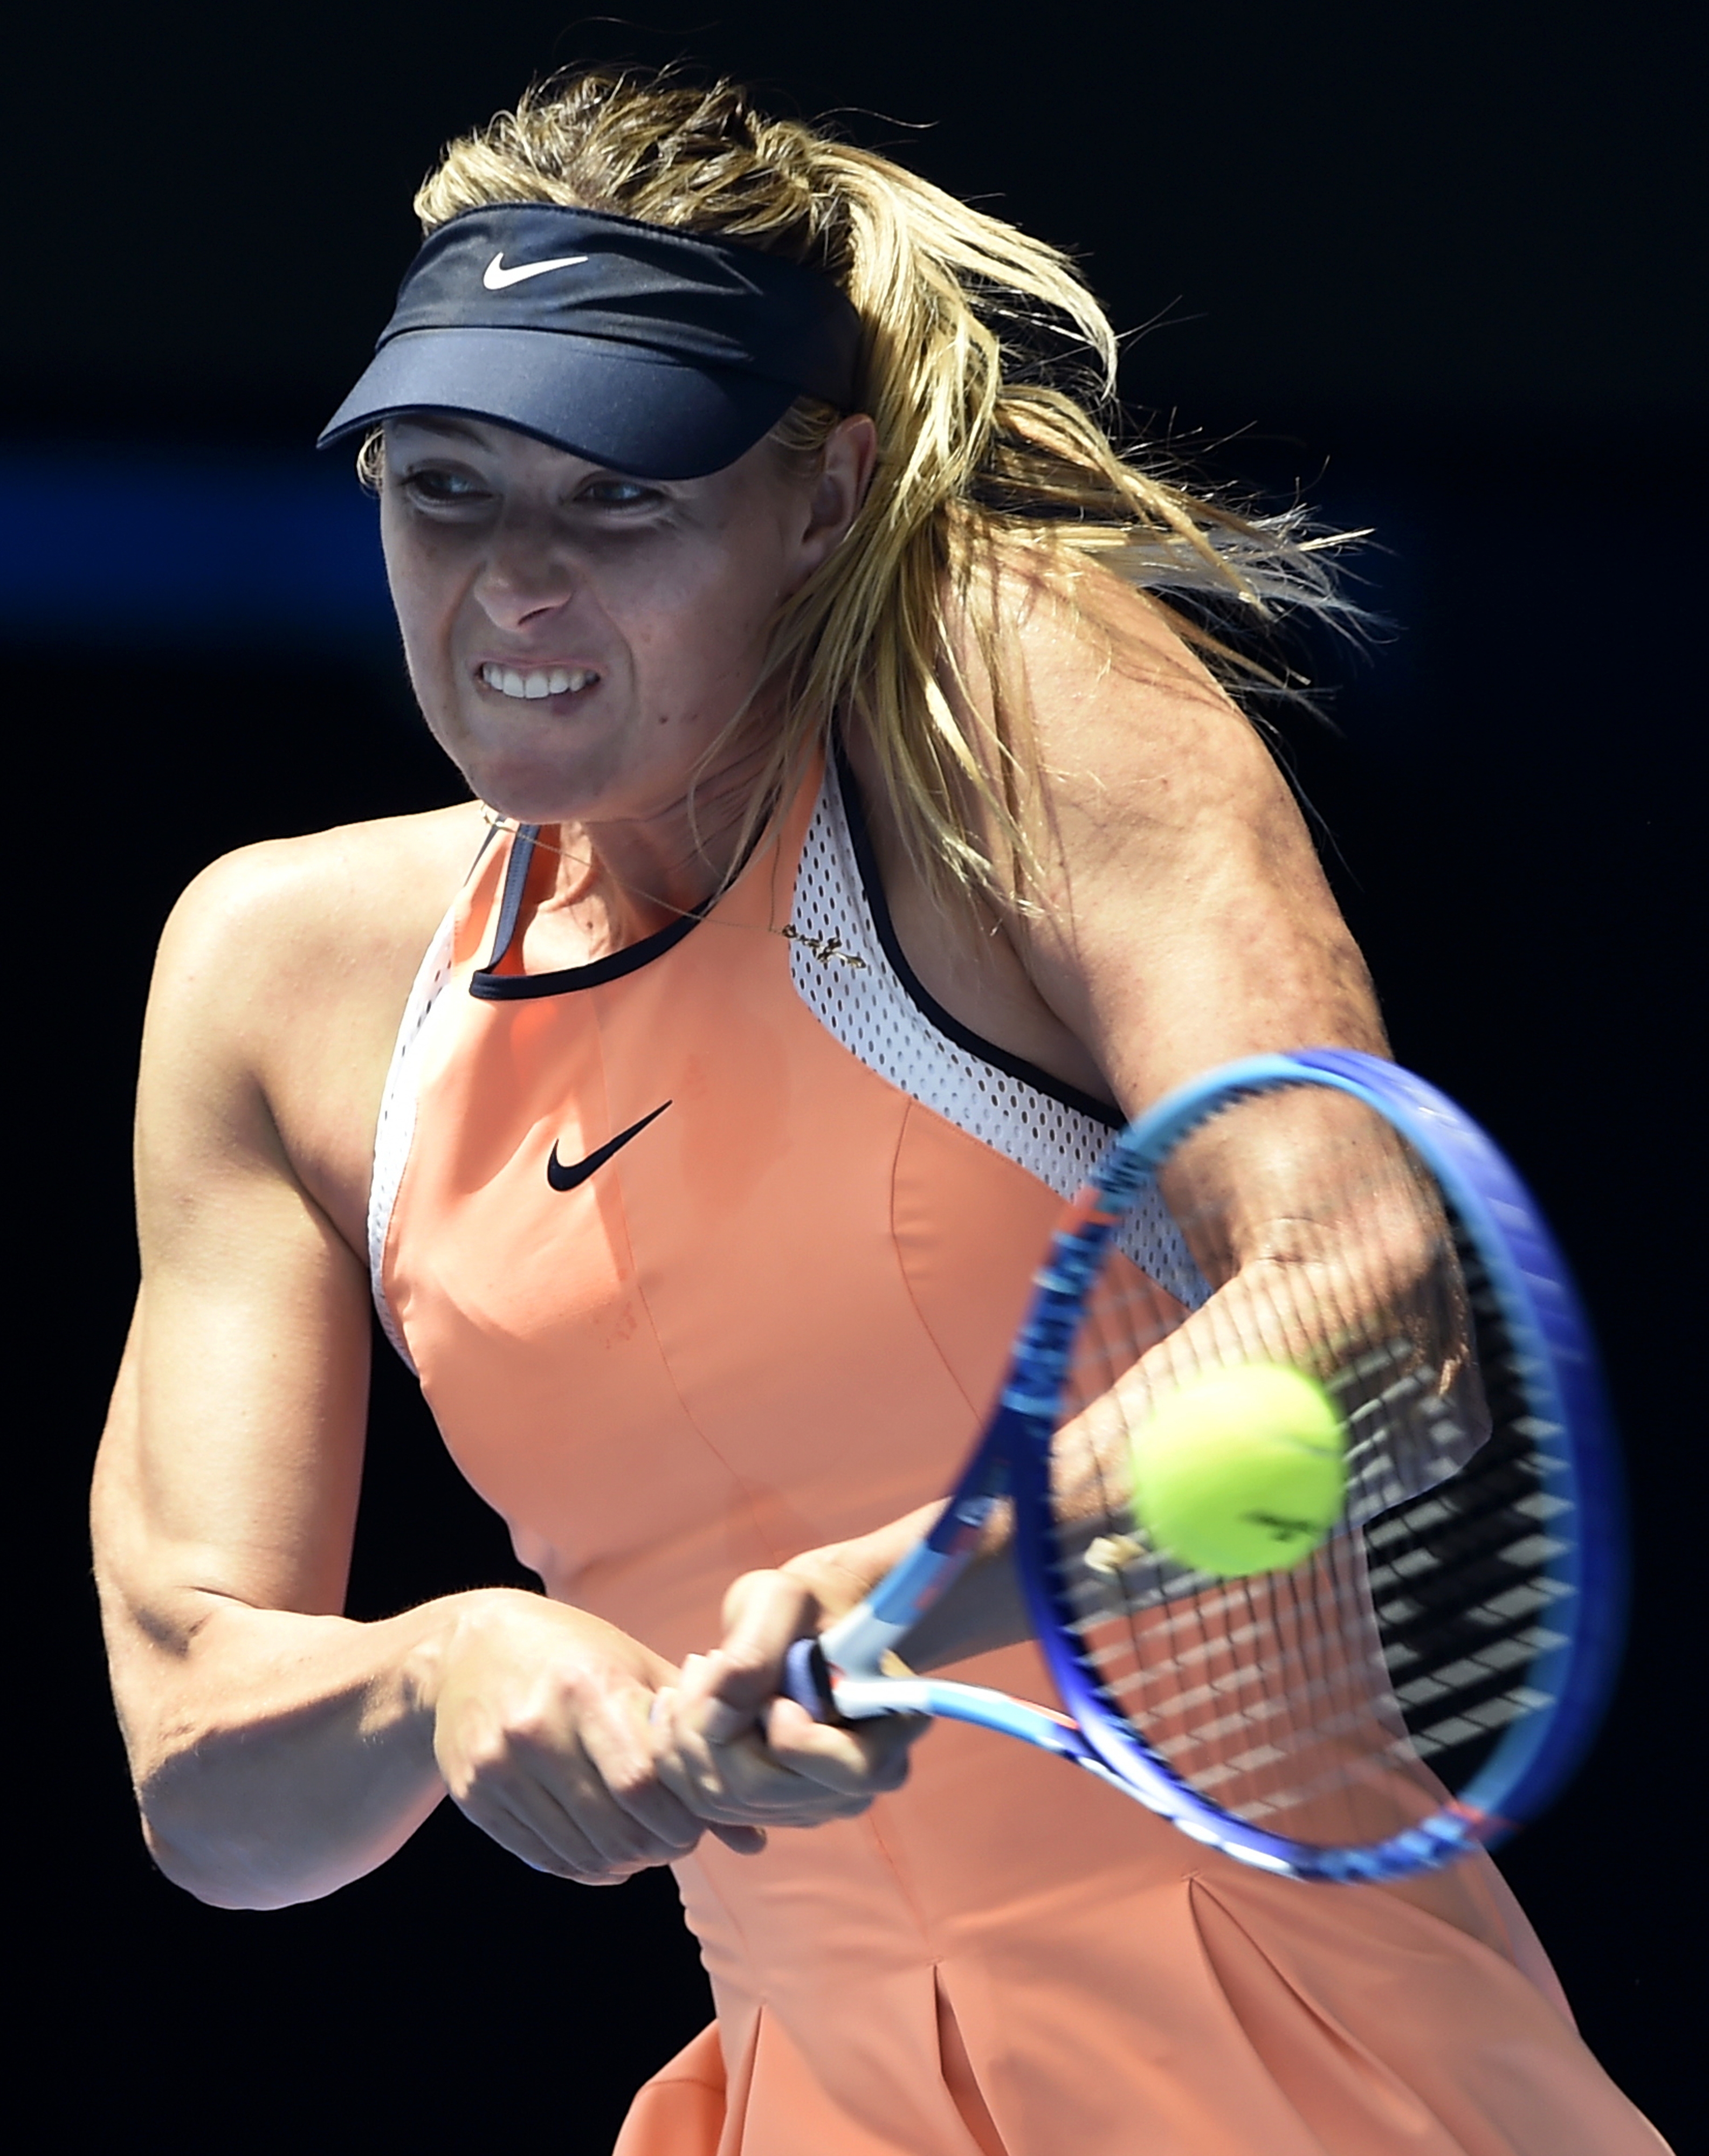 At the 2016 Australian Open Sharapova tested positive for a banned substance